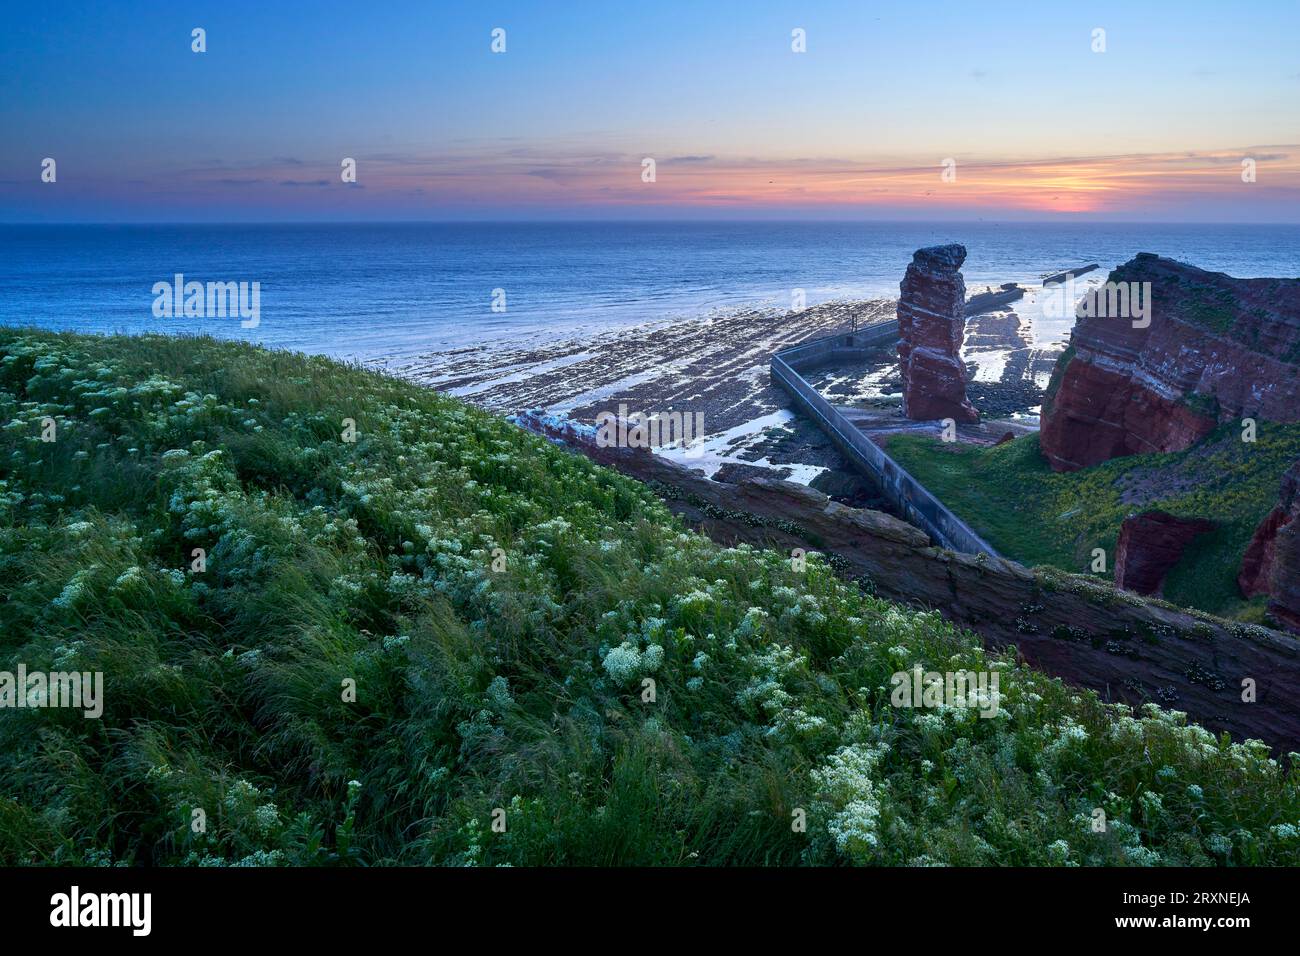 Lange Anna with cliffs on the high seas island of Helgoland, dusk, Helgoland, Pinneberg district, Schleswig-Holstein, Germany Stock Photo